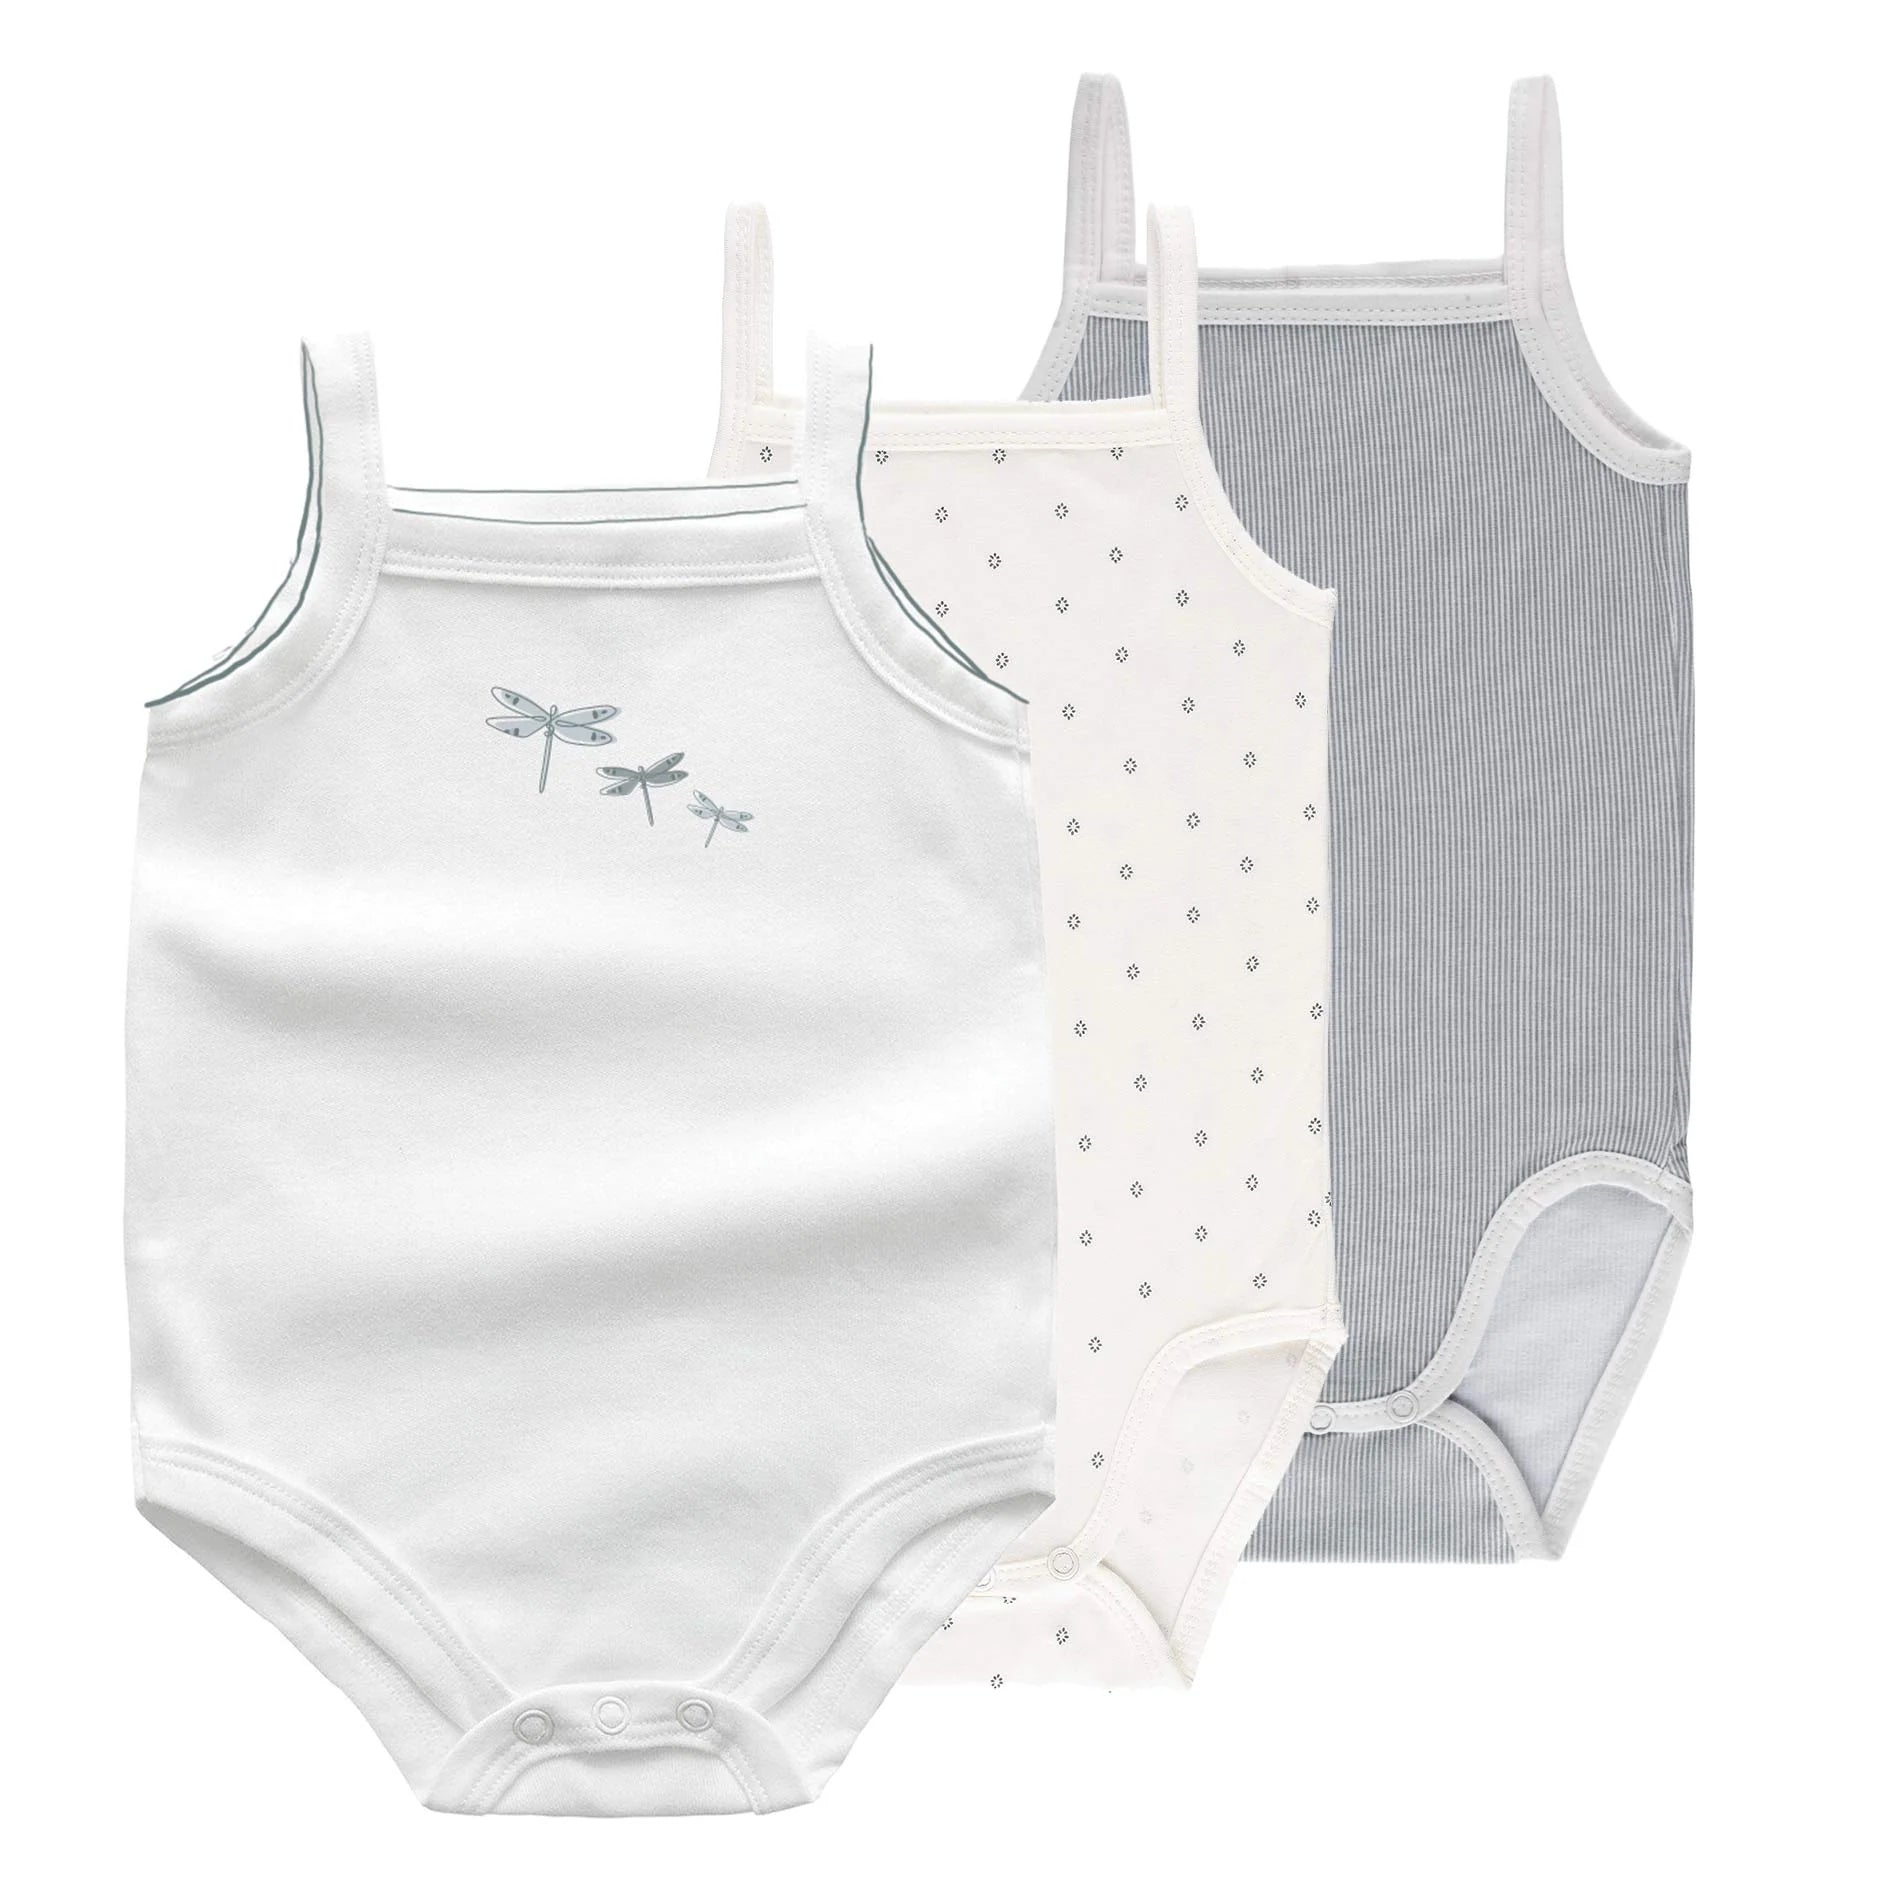 Ely&#39;s And Co 3 Pack Dragonfly Undershirts